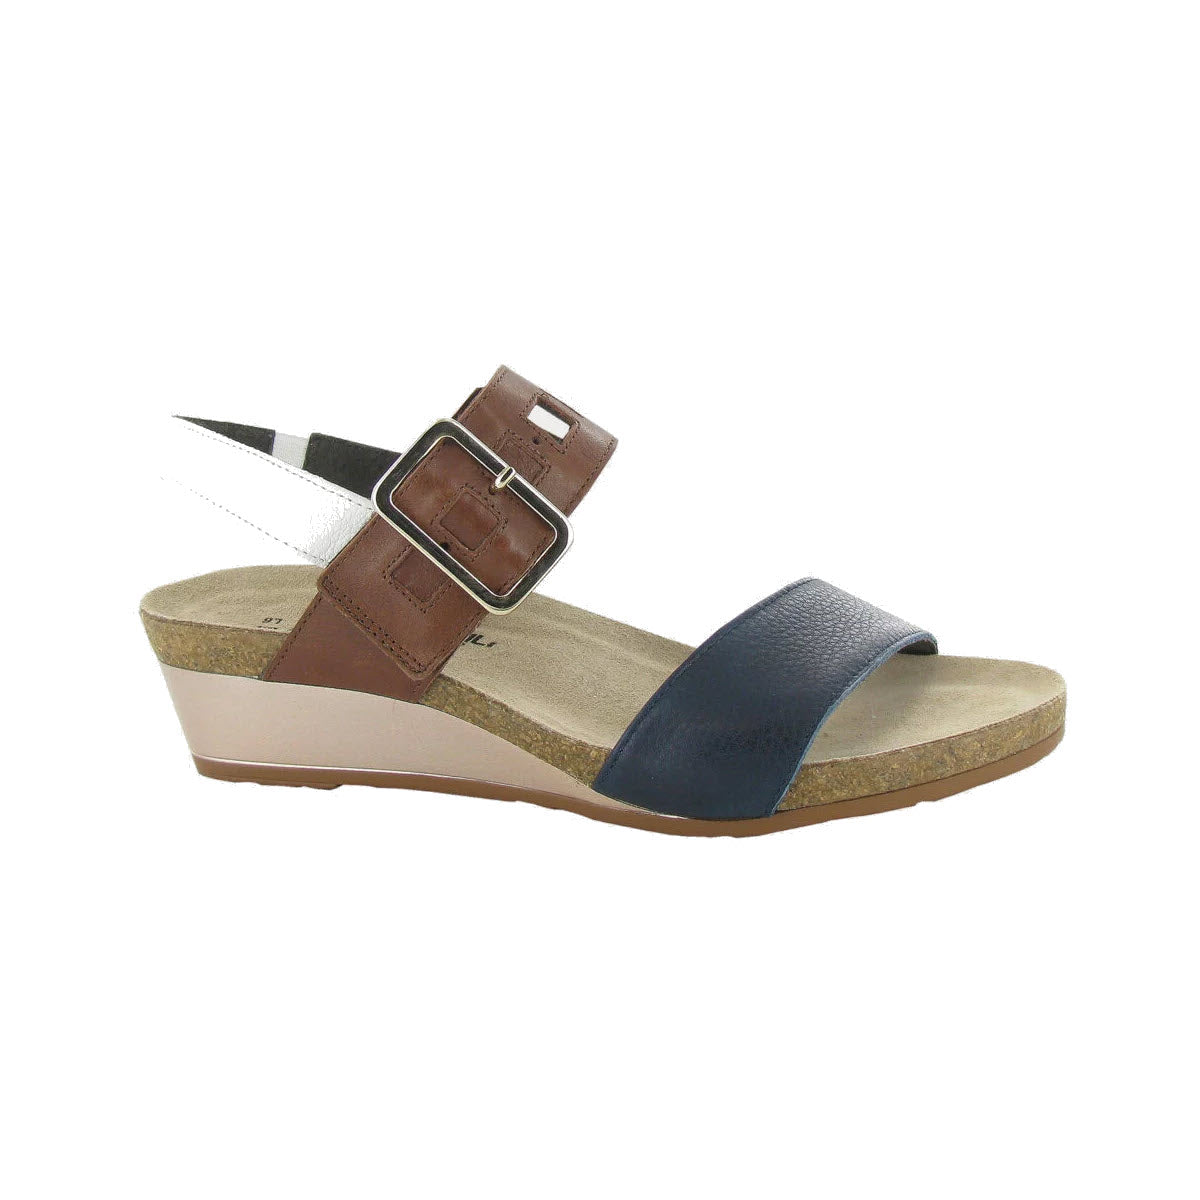 A Naot NAOT DYNASTY INK CHESTNUT MULTI - WOMENS with a brown and navy blue strap, adjustable buckle on the ankle strap, a tan cork footbed for added comfort, and a cream-colored sole.